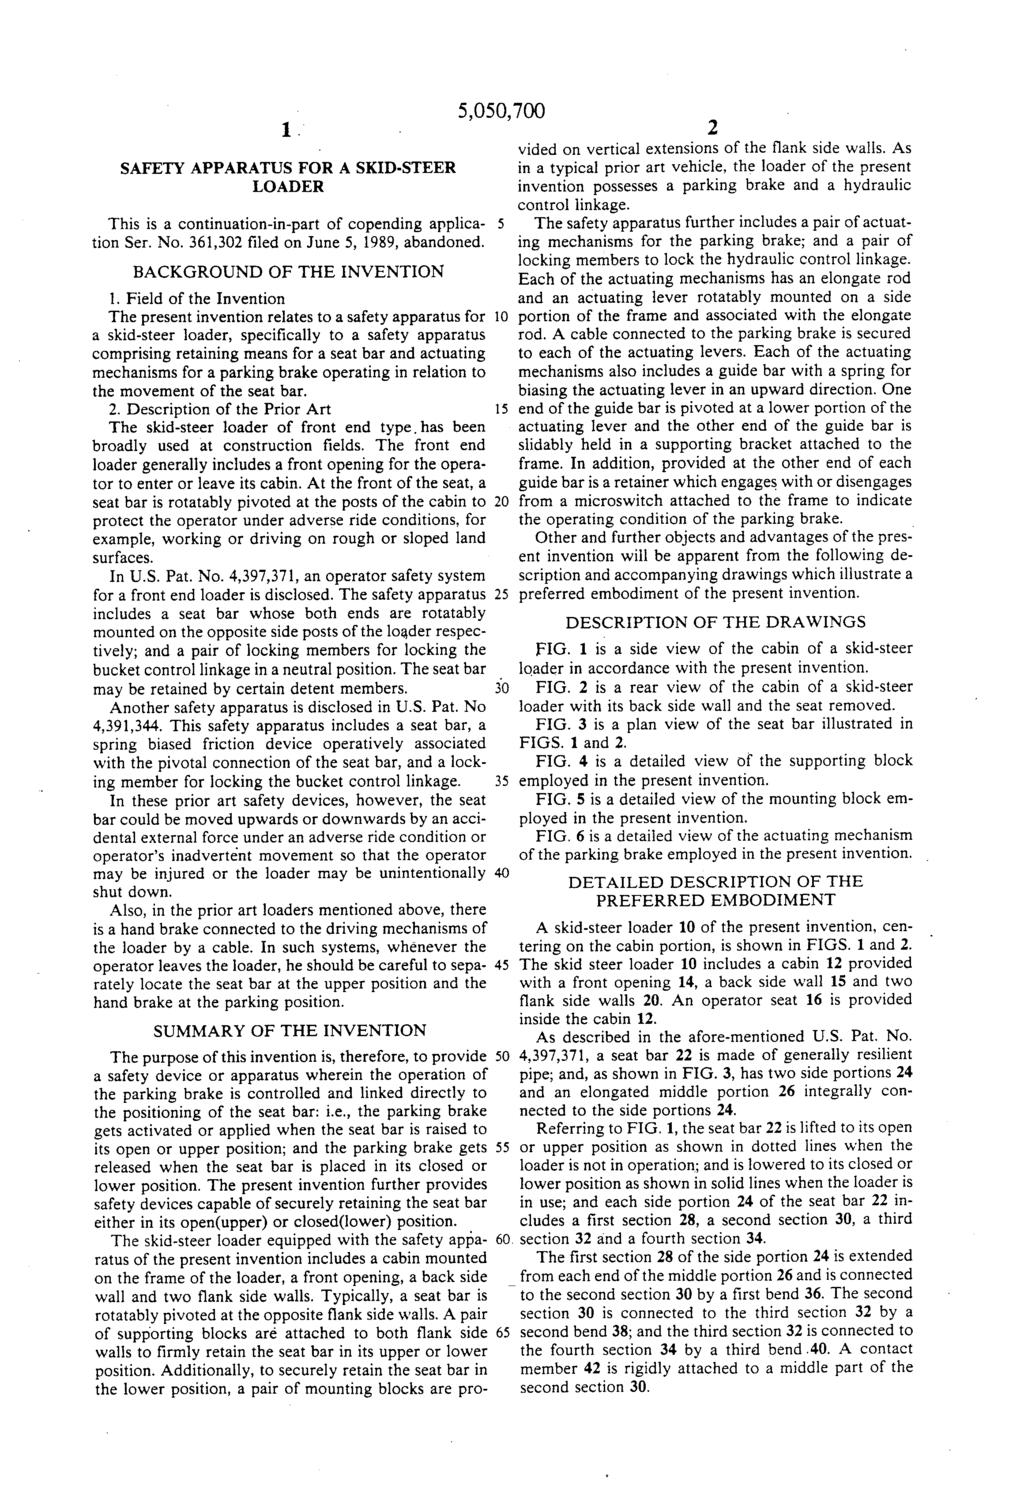 1. SAFETY APPARATUS FOR A SKID-STEER LOADER This is a continuation-in-part of copending applica tion Ser. No. 361,302 filed on June 5, 1989, abandoned. BACKGROUND OF THE INVENTION 1.